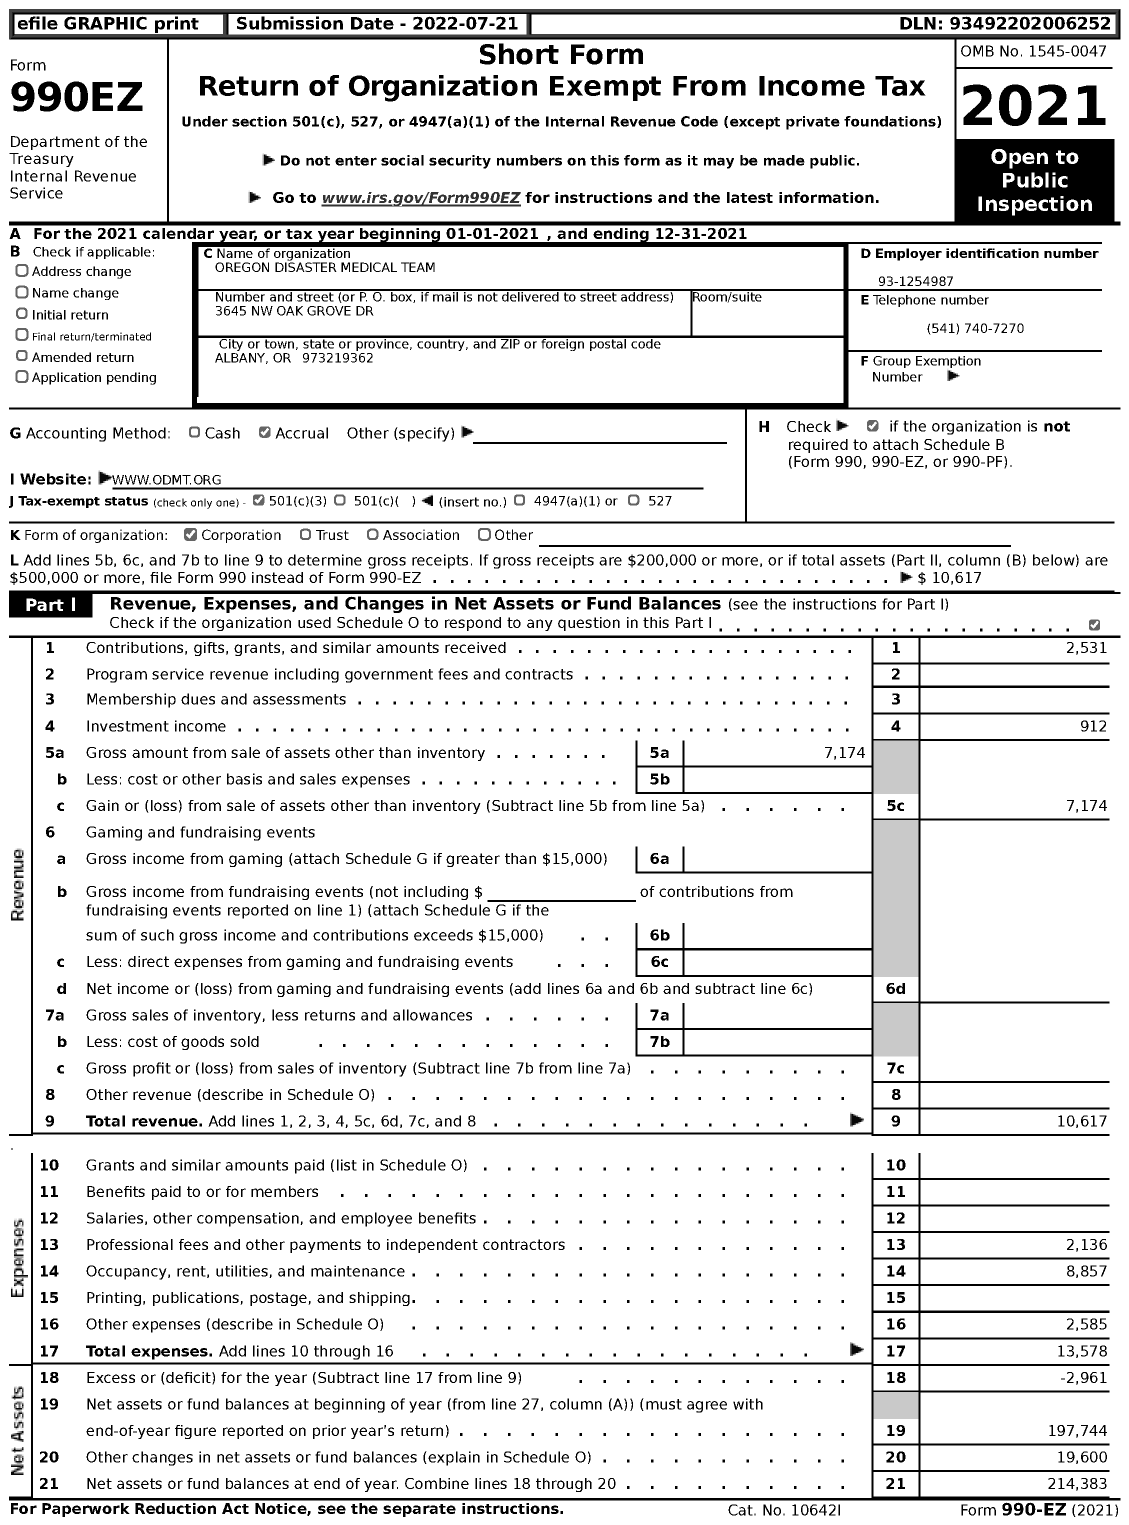 Image of first page of 2021 Form 990EZ for Oregon Disaster Medical Team